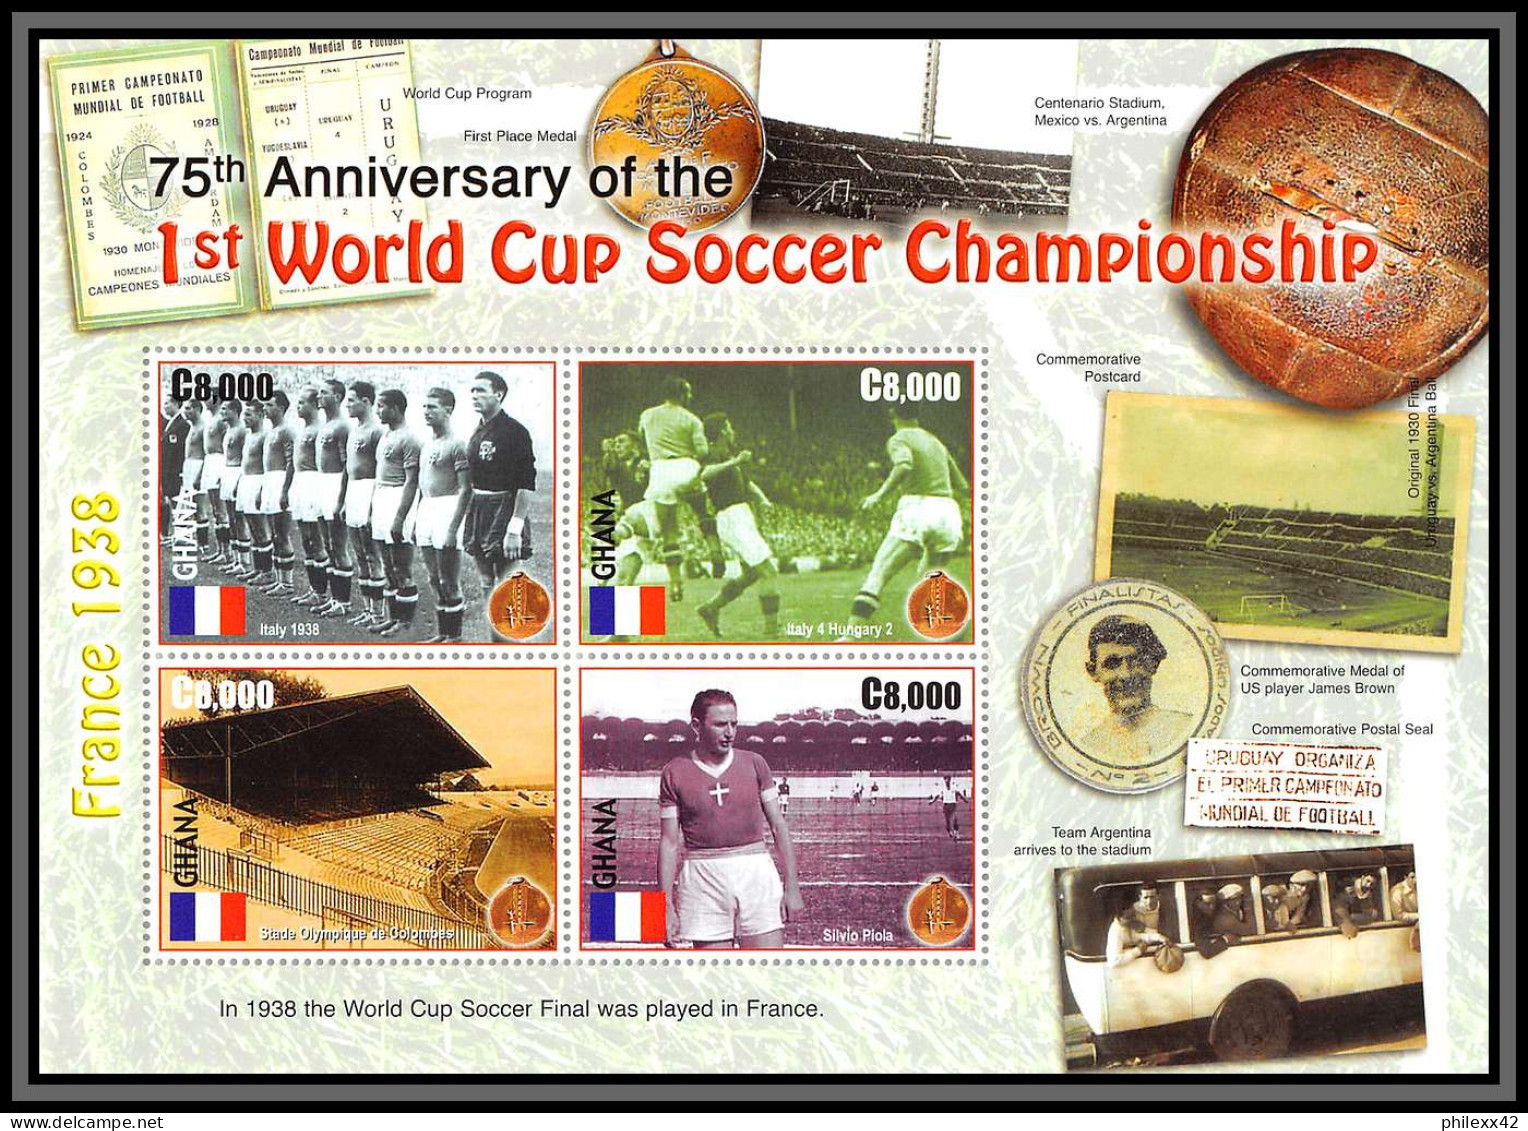 81239c Ghana N°468 75th Anniversary Of The 1rst World Cup Coupe Du Monde France 1938 ** MNH Football Soccer 2005 2 Blocs - 1938 – France